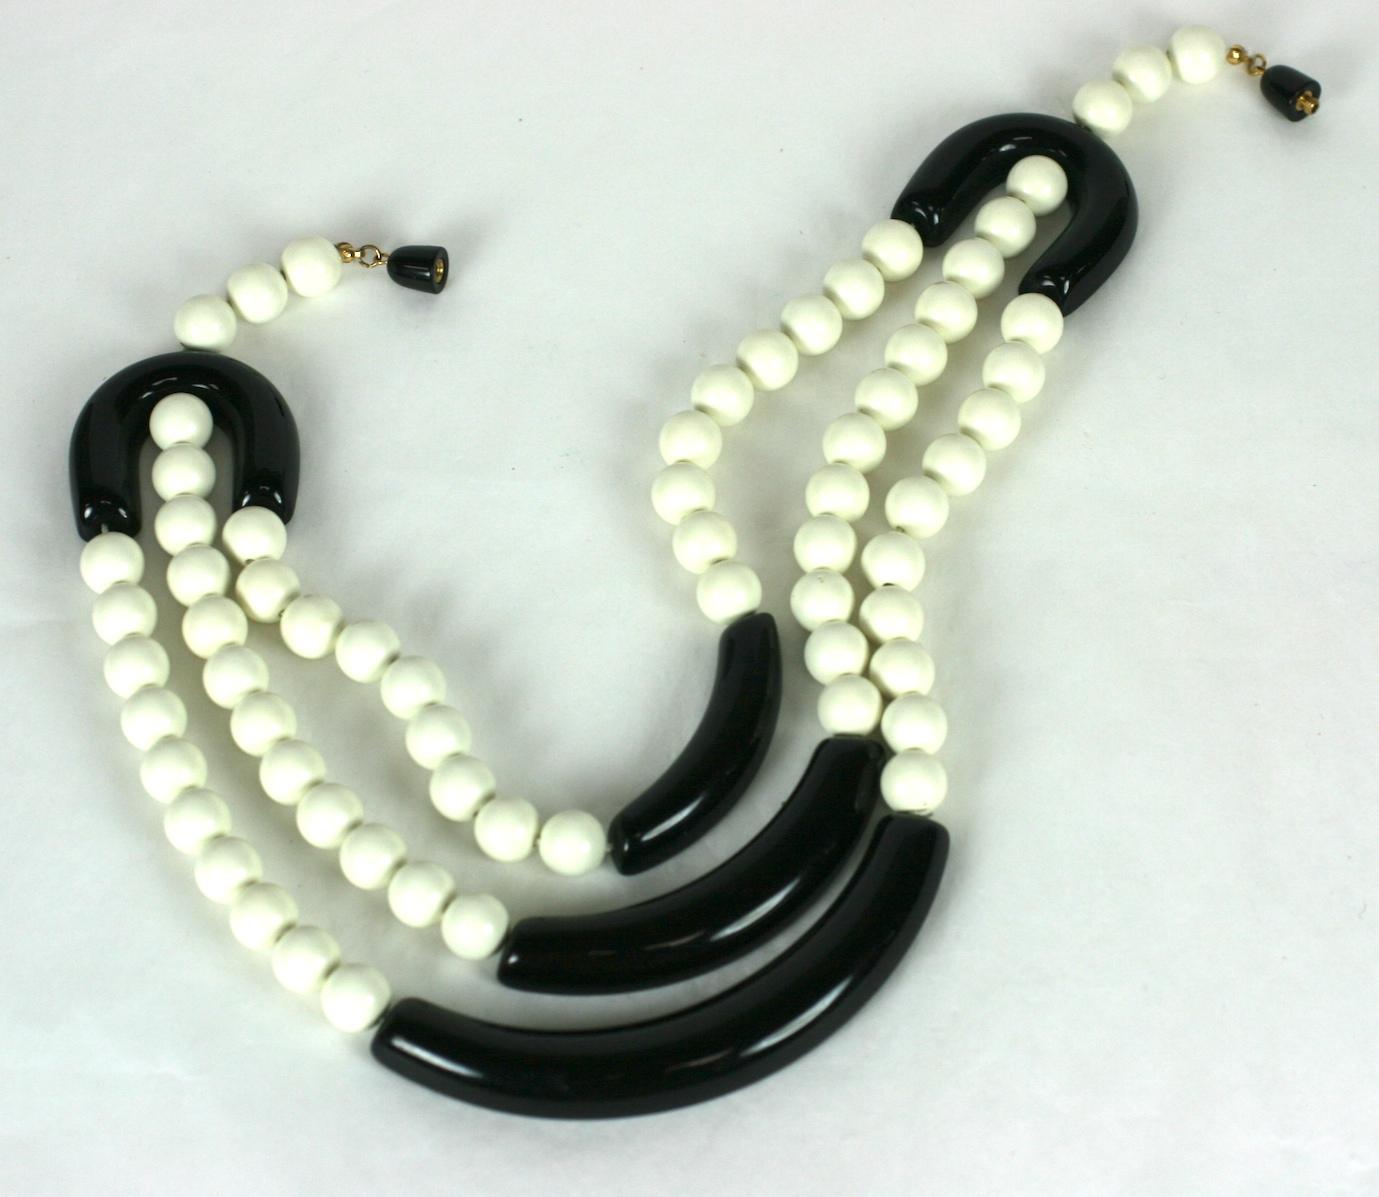 Ugo Correani  for Chloe, designer Karl Lagerfeld's Art Deco inspired bead necklace. Composed of   three strands of white resin beads punctuated by black resin arcs. Black resin barrel clasp.
Excellent Condition, Unsigned. 
L 18.50